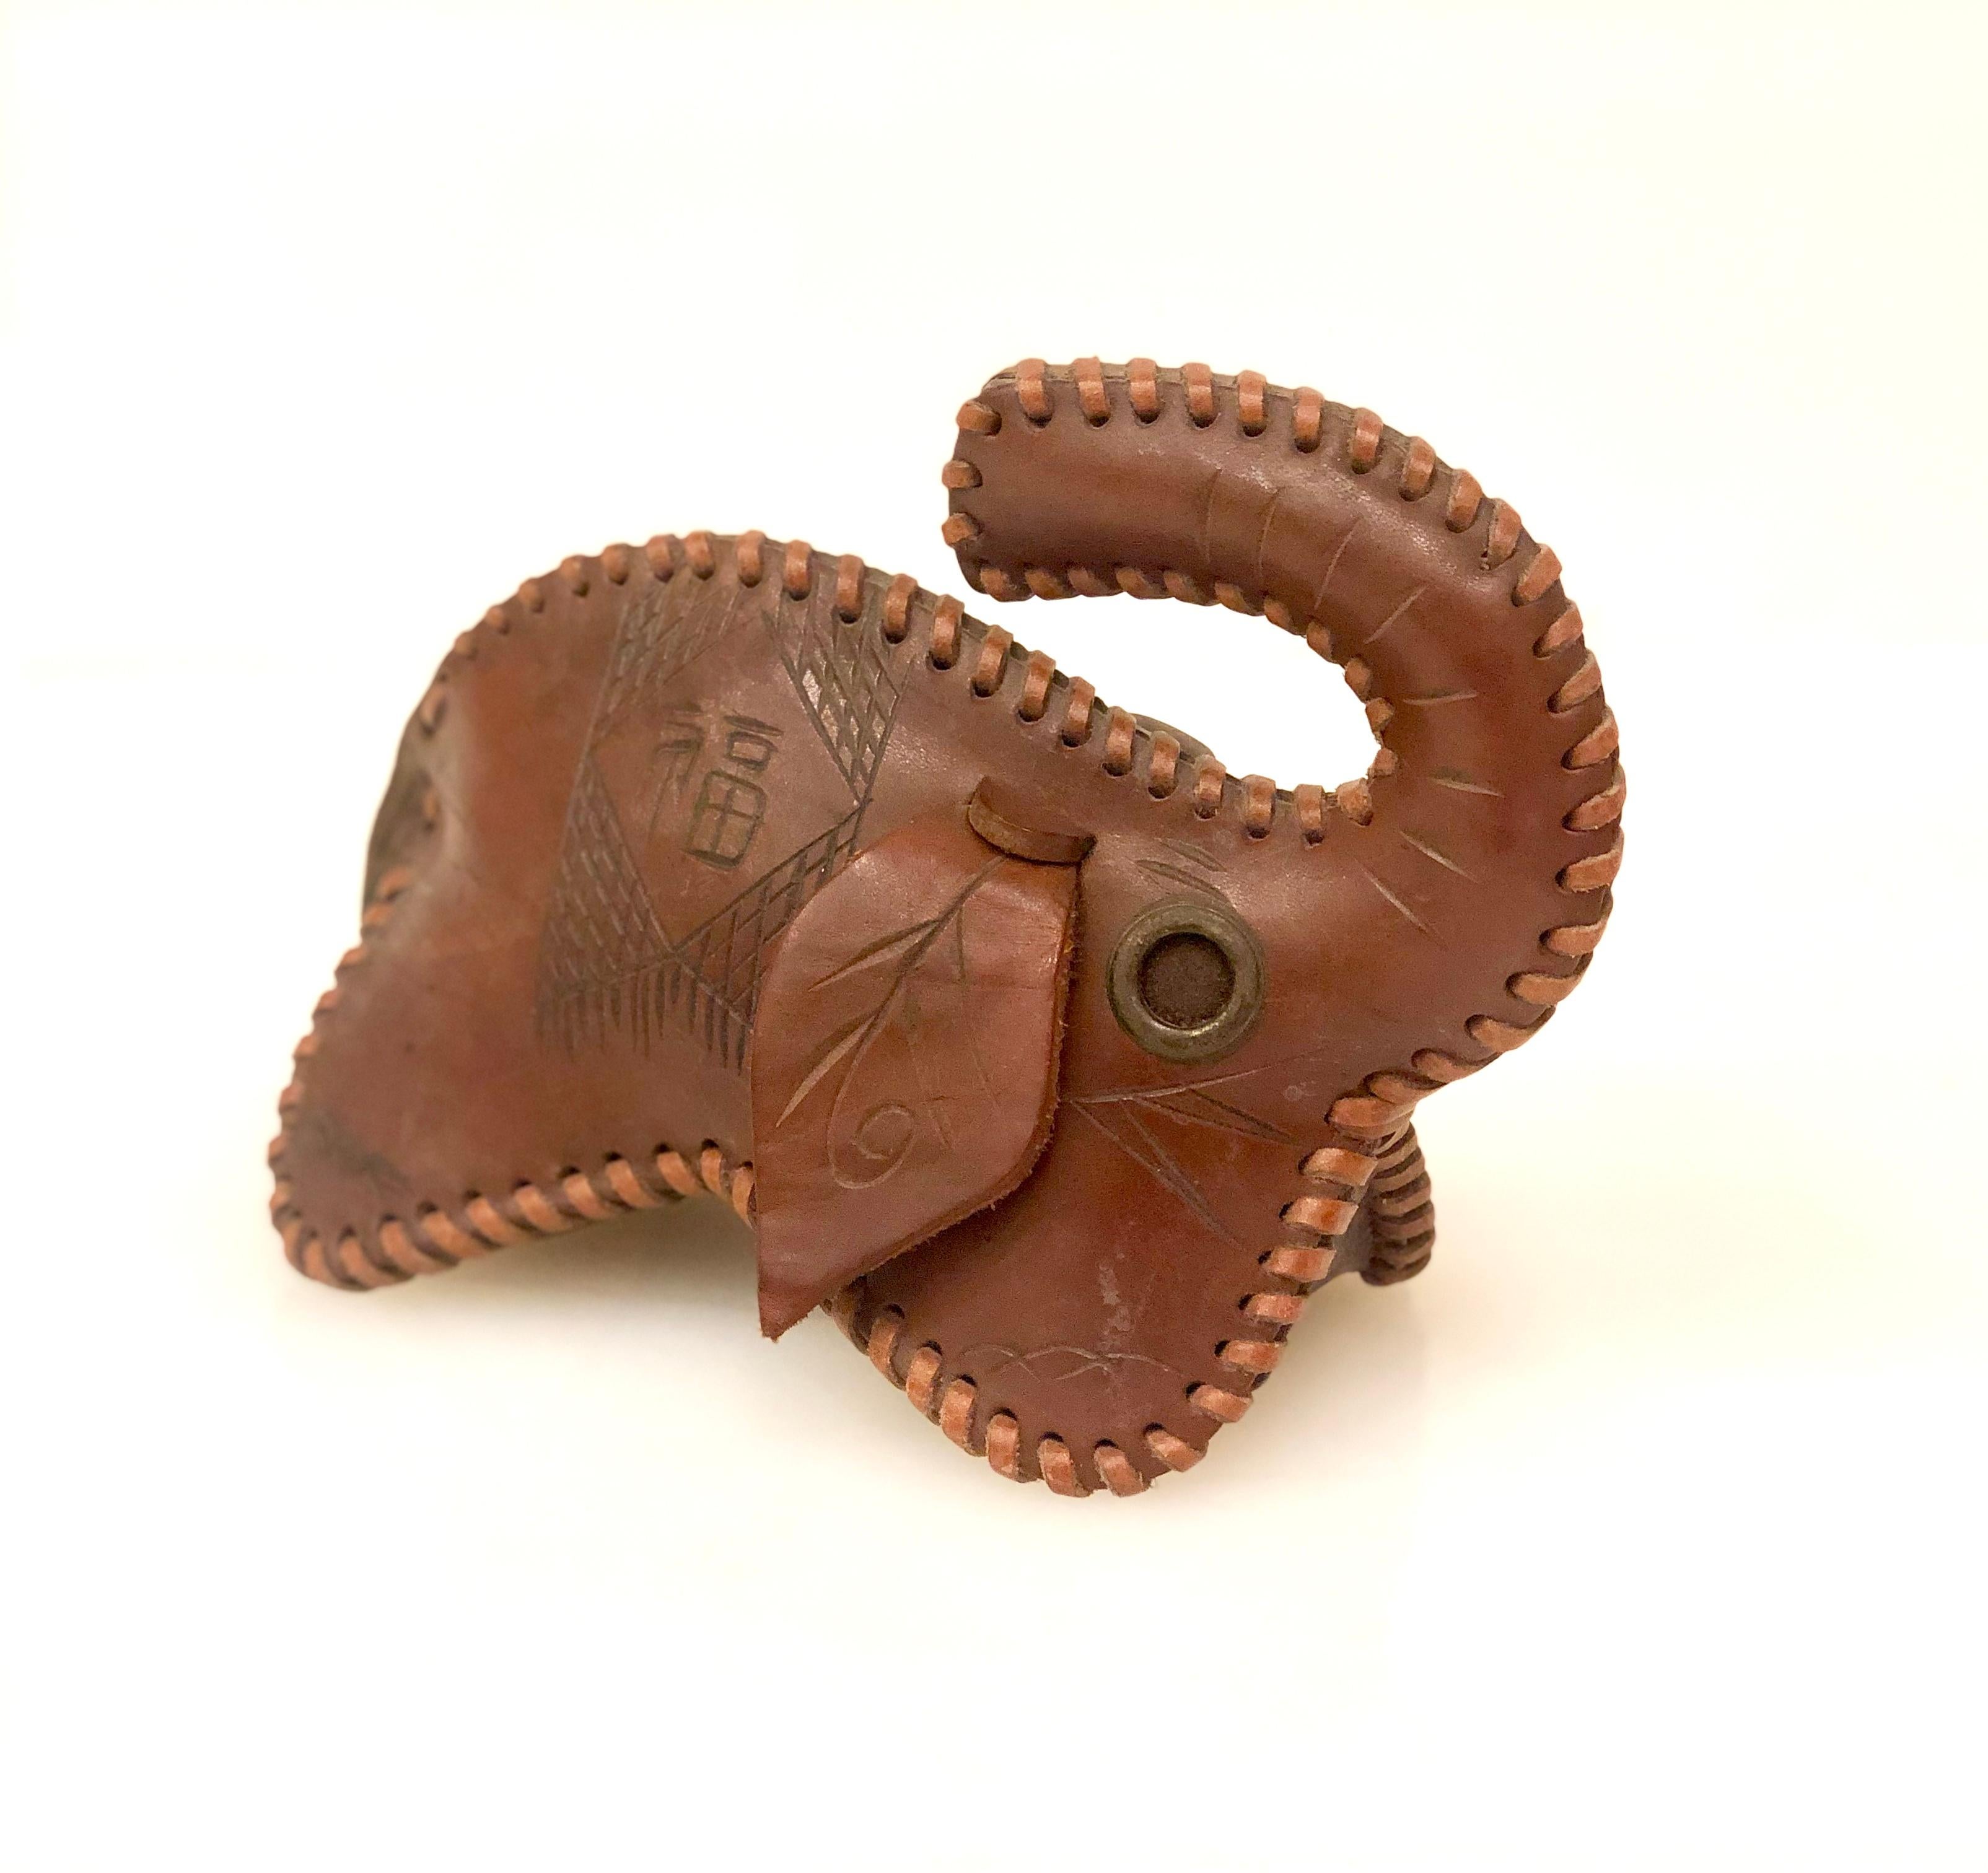 A rare and unique leather elephant toy or decorative object, with handstitched leather cord, and engraving on the sides as shown, metal rings as eyes well done piece filled inside.